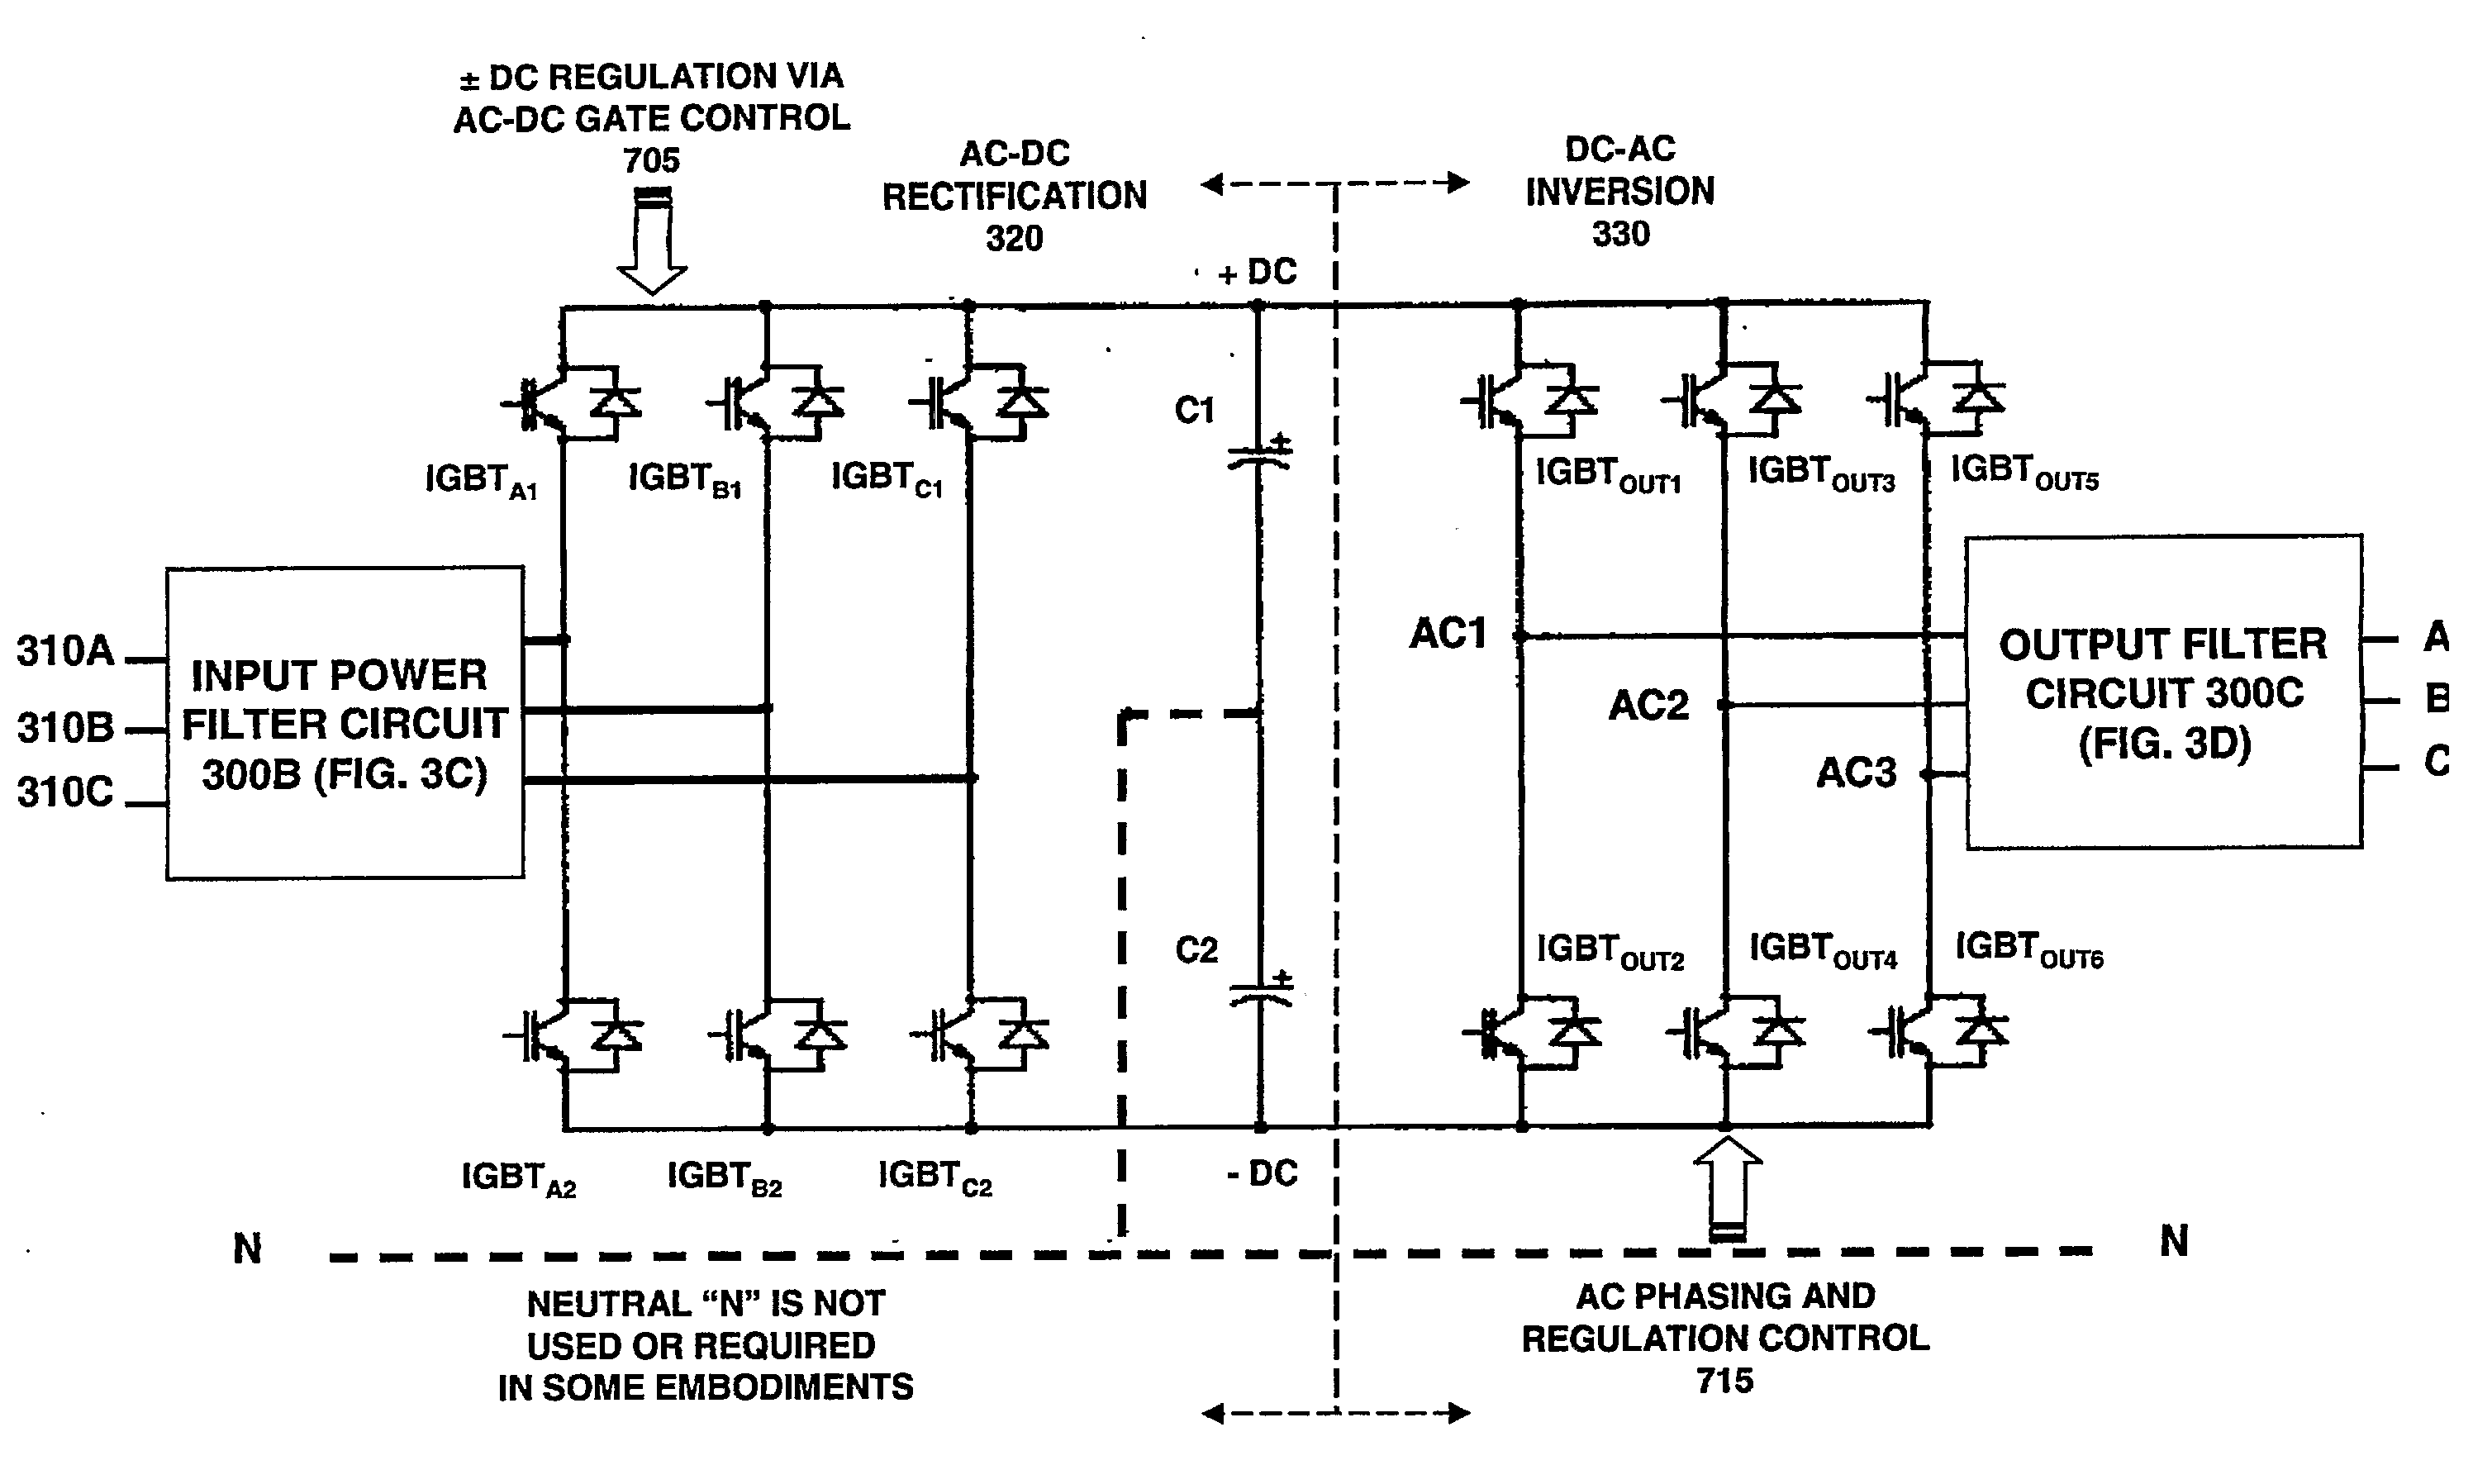 System and Method for Electrical Power Conversion